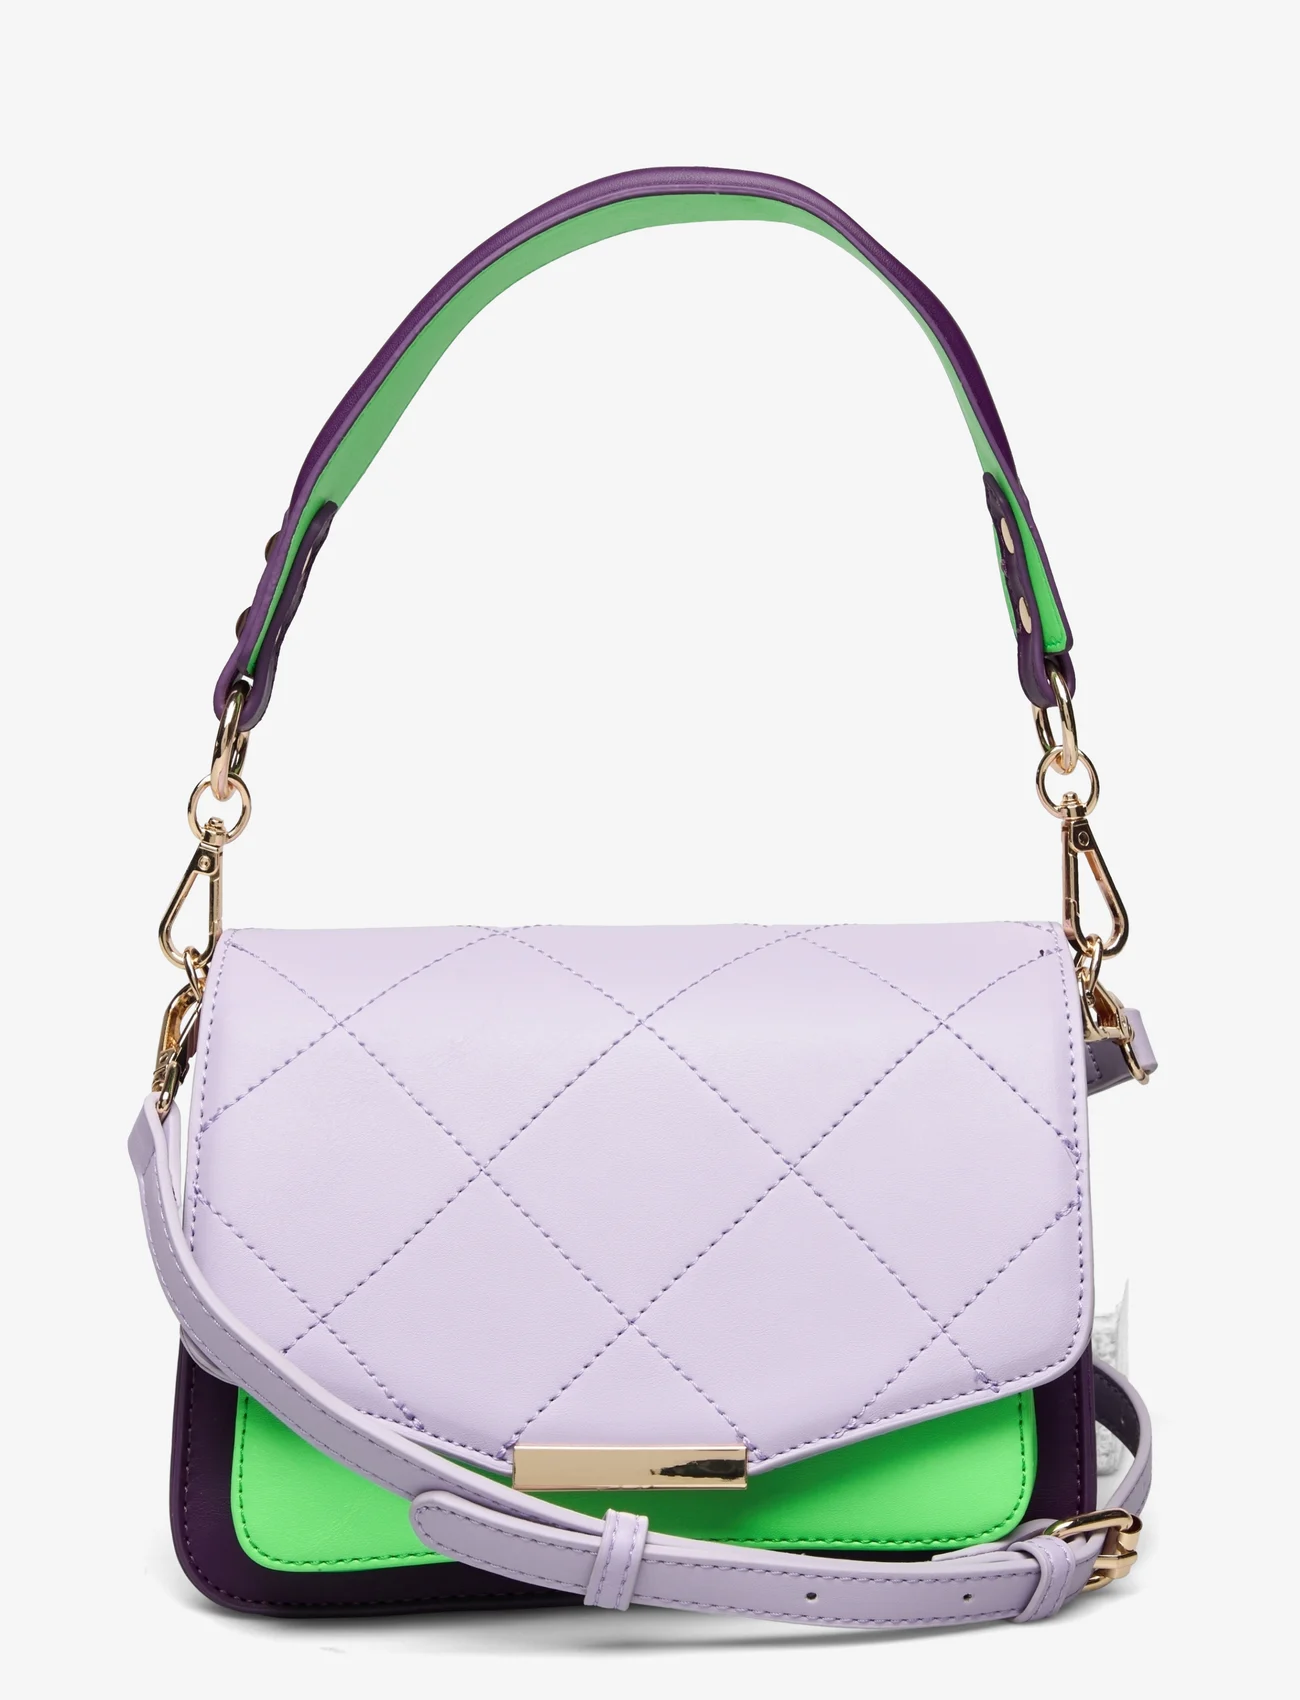 Noella - Blanca Bag Medium - party wear at outlet prices - purple/plum/neon green - 0